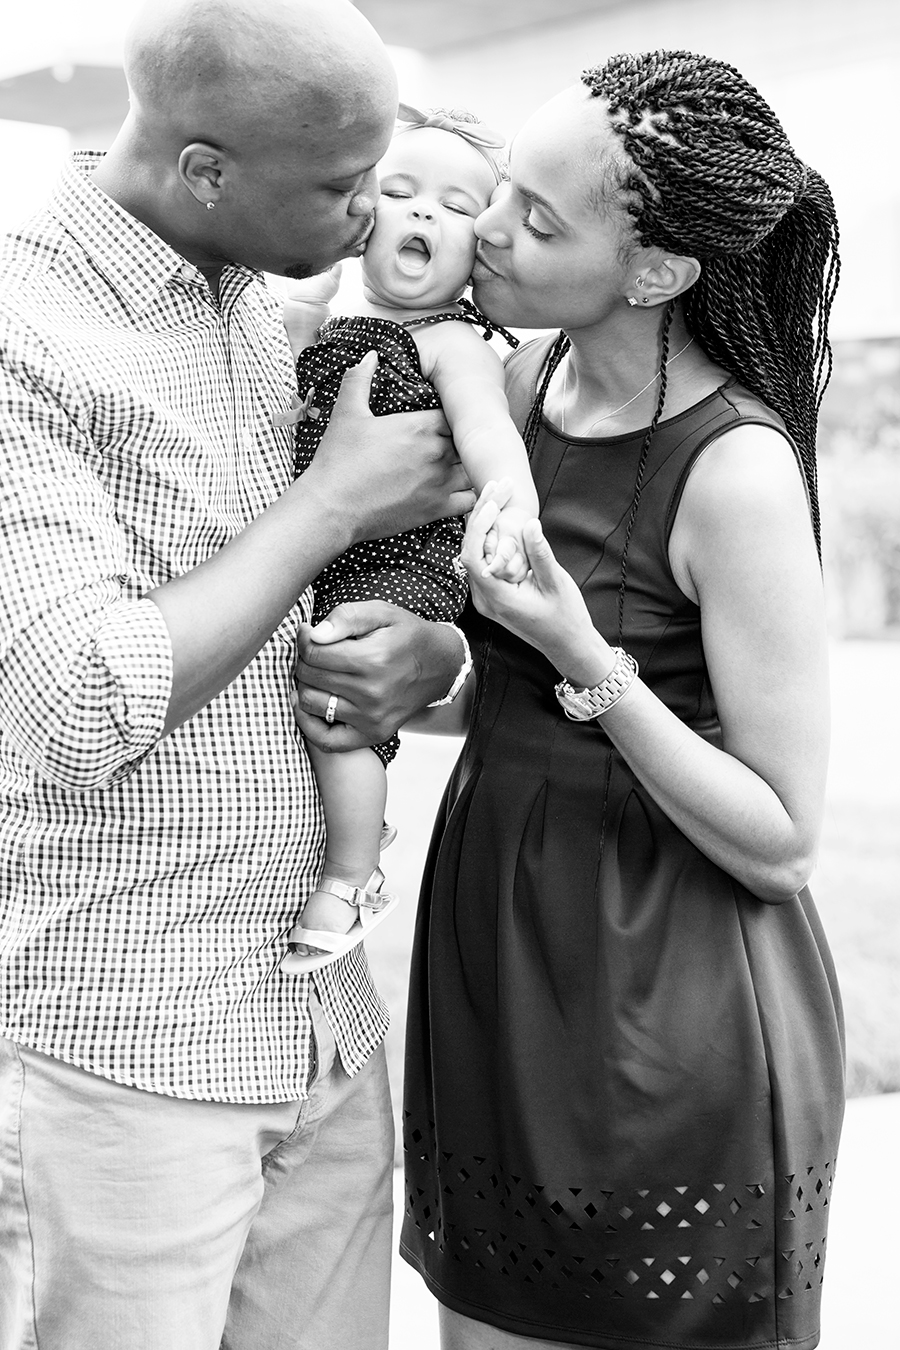 Price Family Photos at the VMFA - Image Property of www.j-dphoto.com